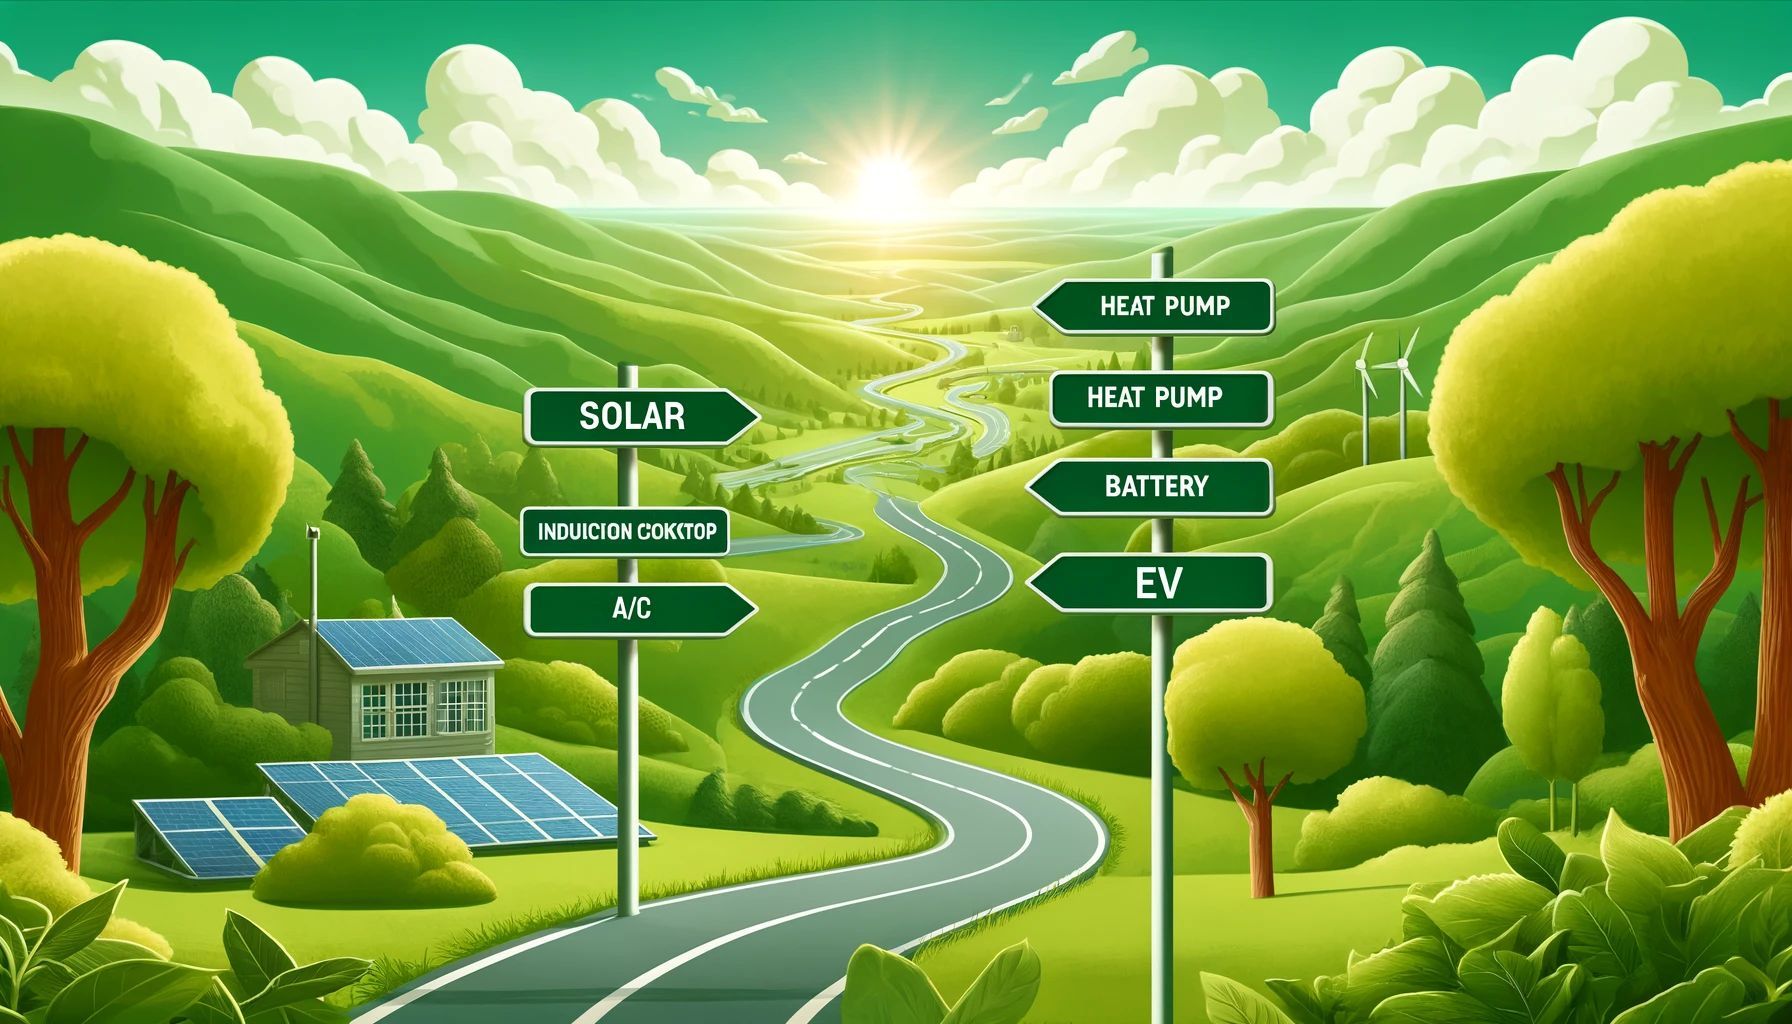 Renewable energy roadmap with solar, battery storage, EV charging, Hot water heat pumps, induction cooktops